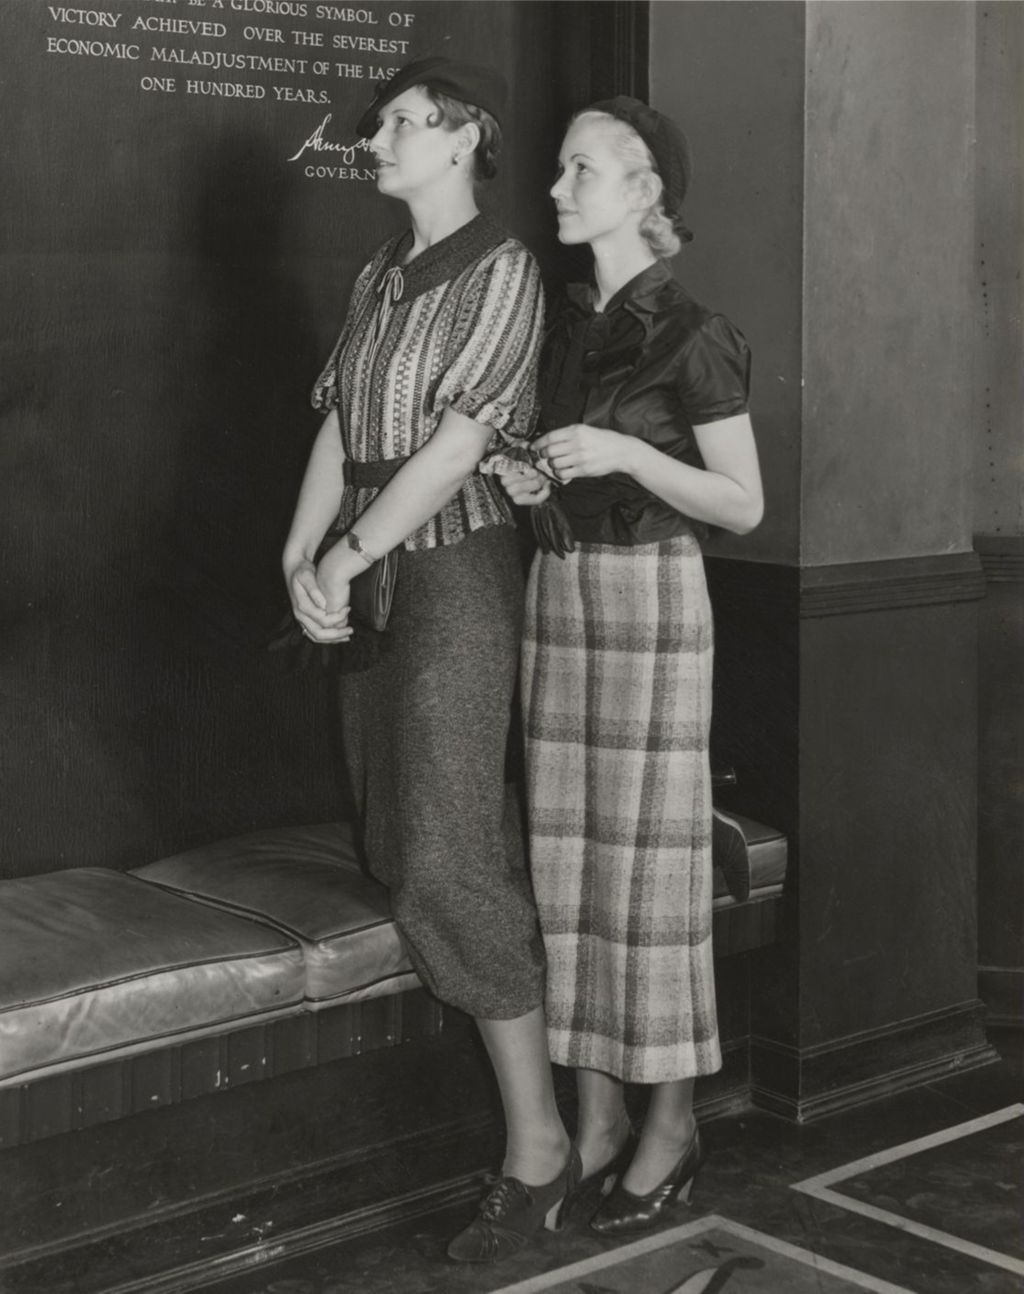 Two young women visit the Illinois Host House